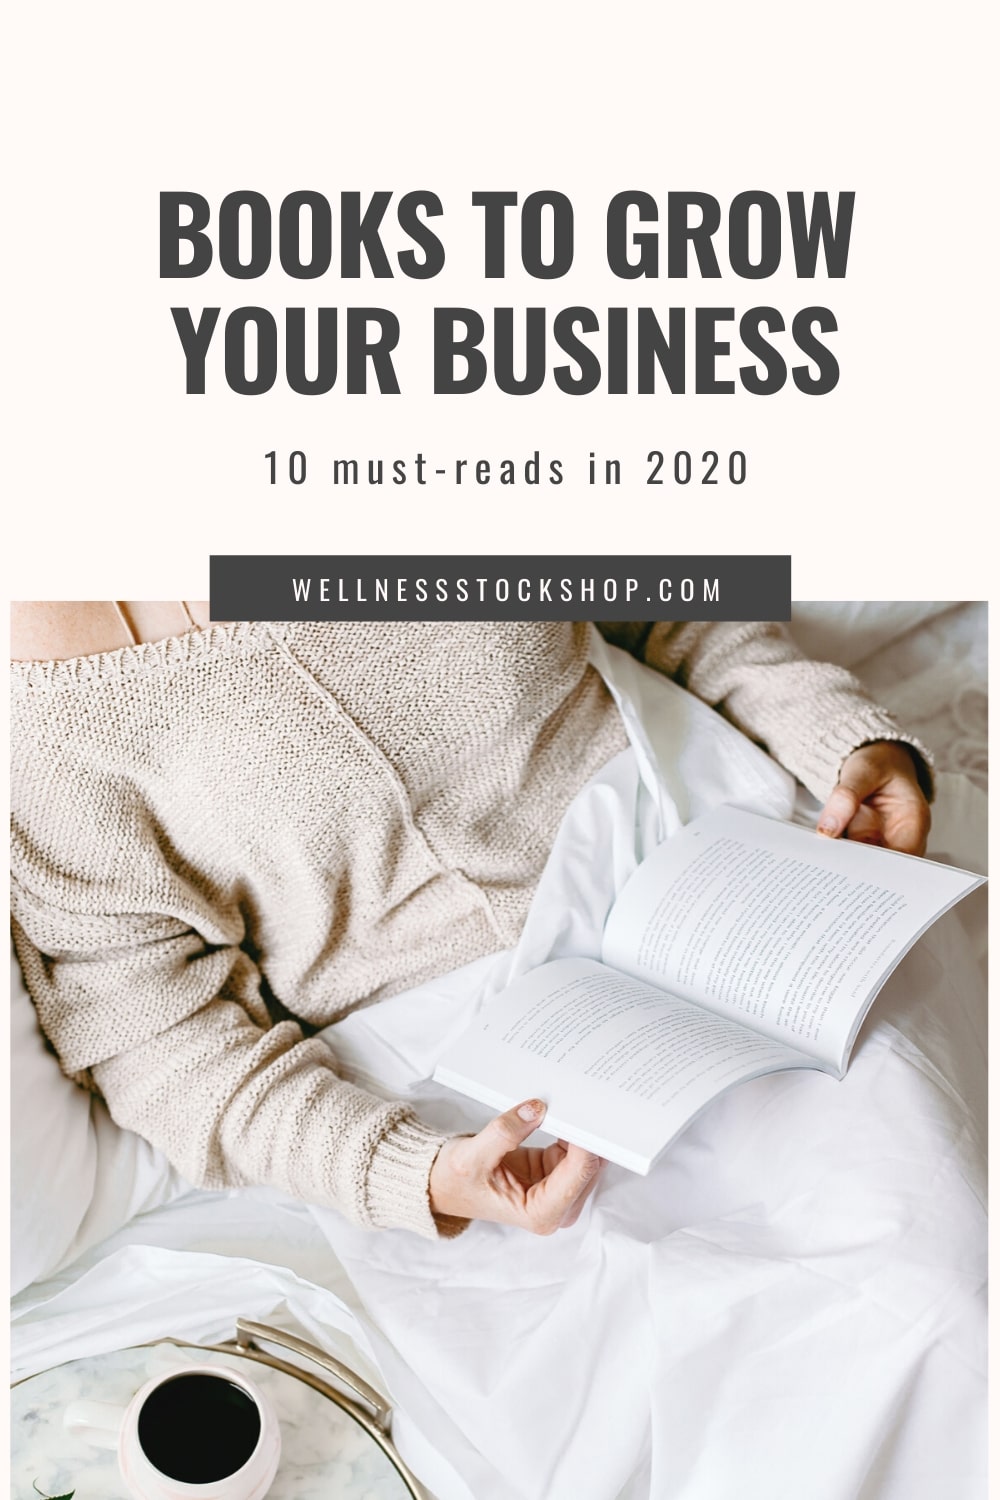 These 10 powerful books will help you grow your wellness business